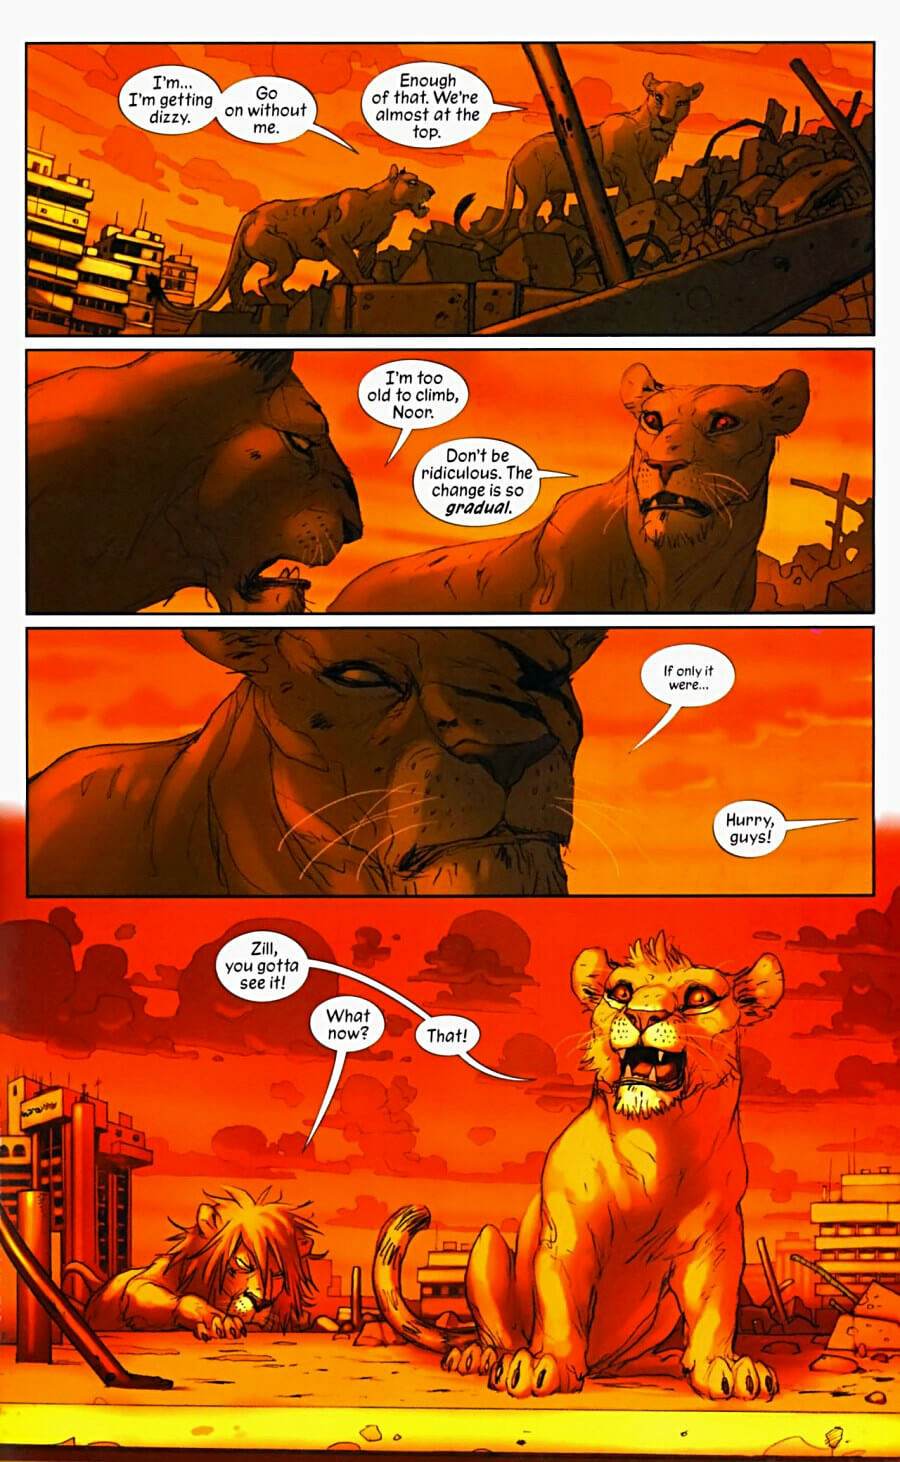 page 105 of pride of baghdad graphic novel